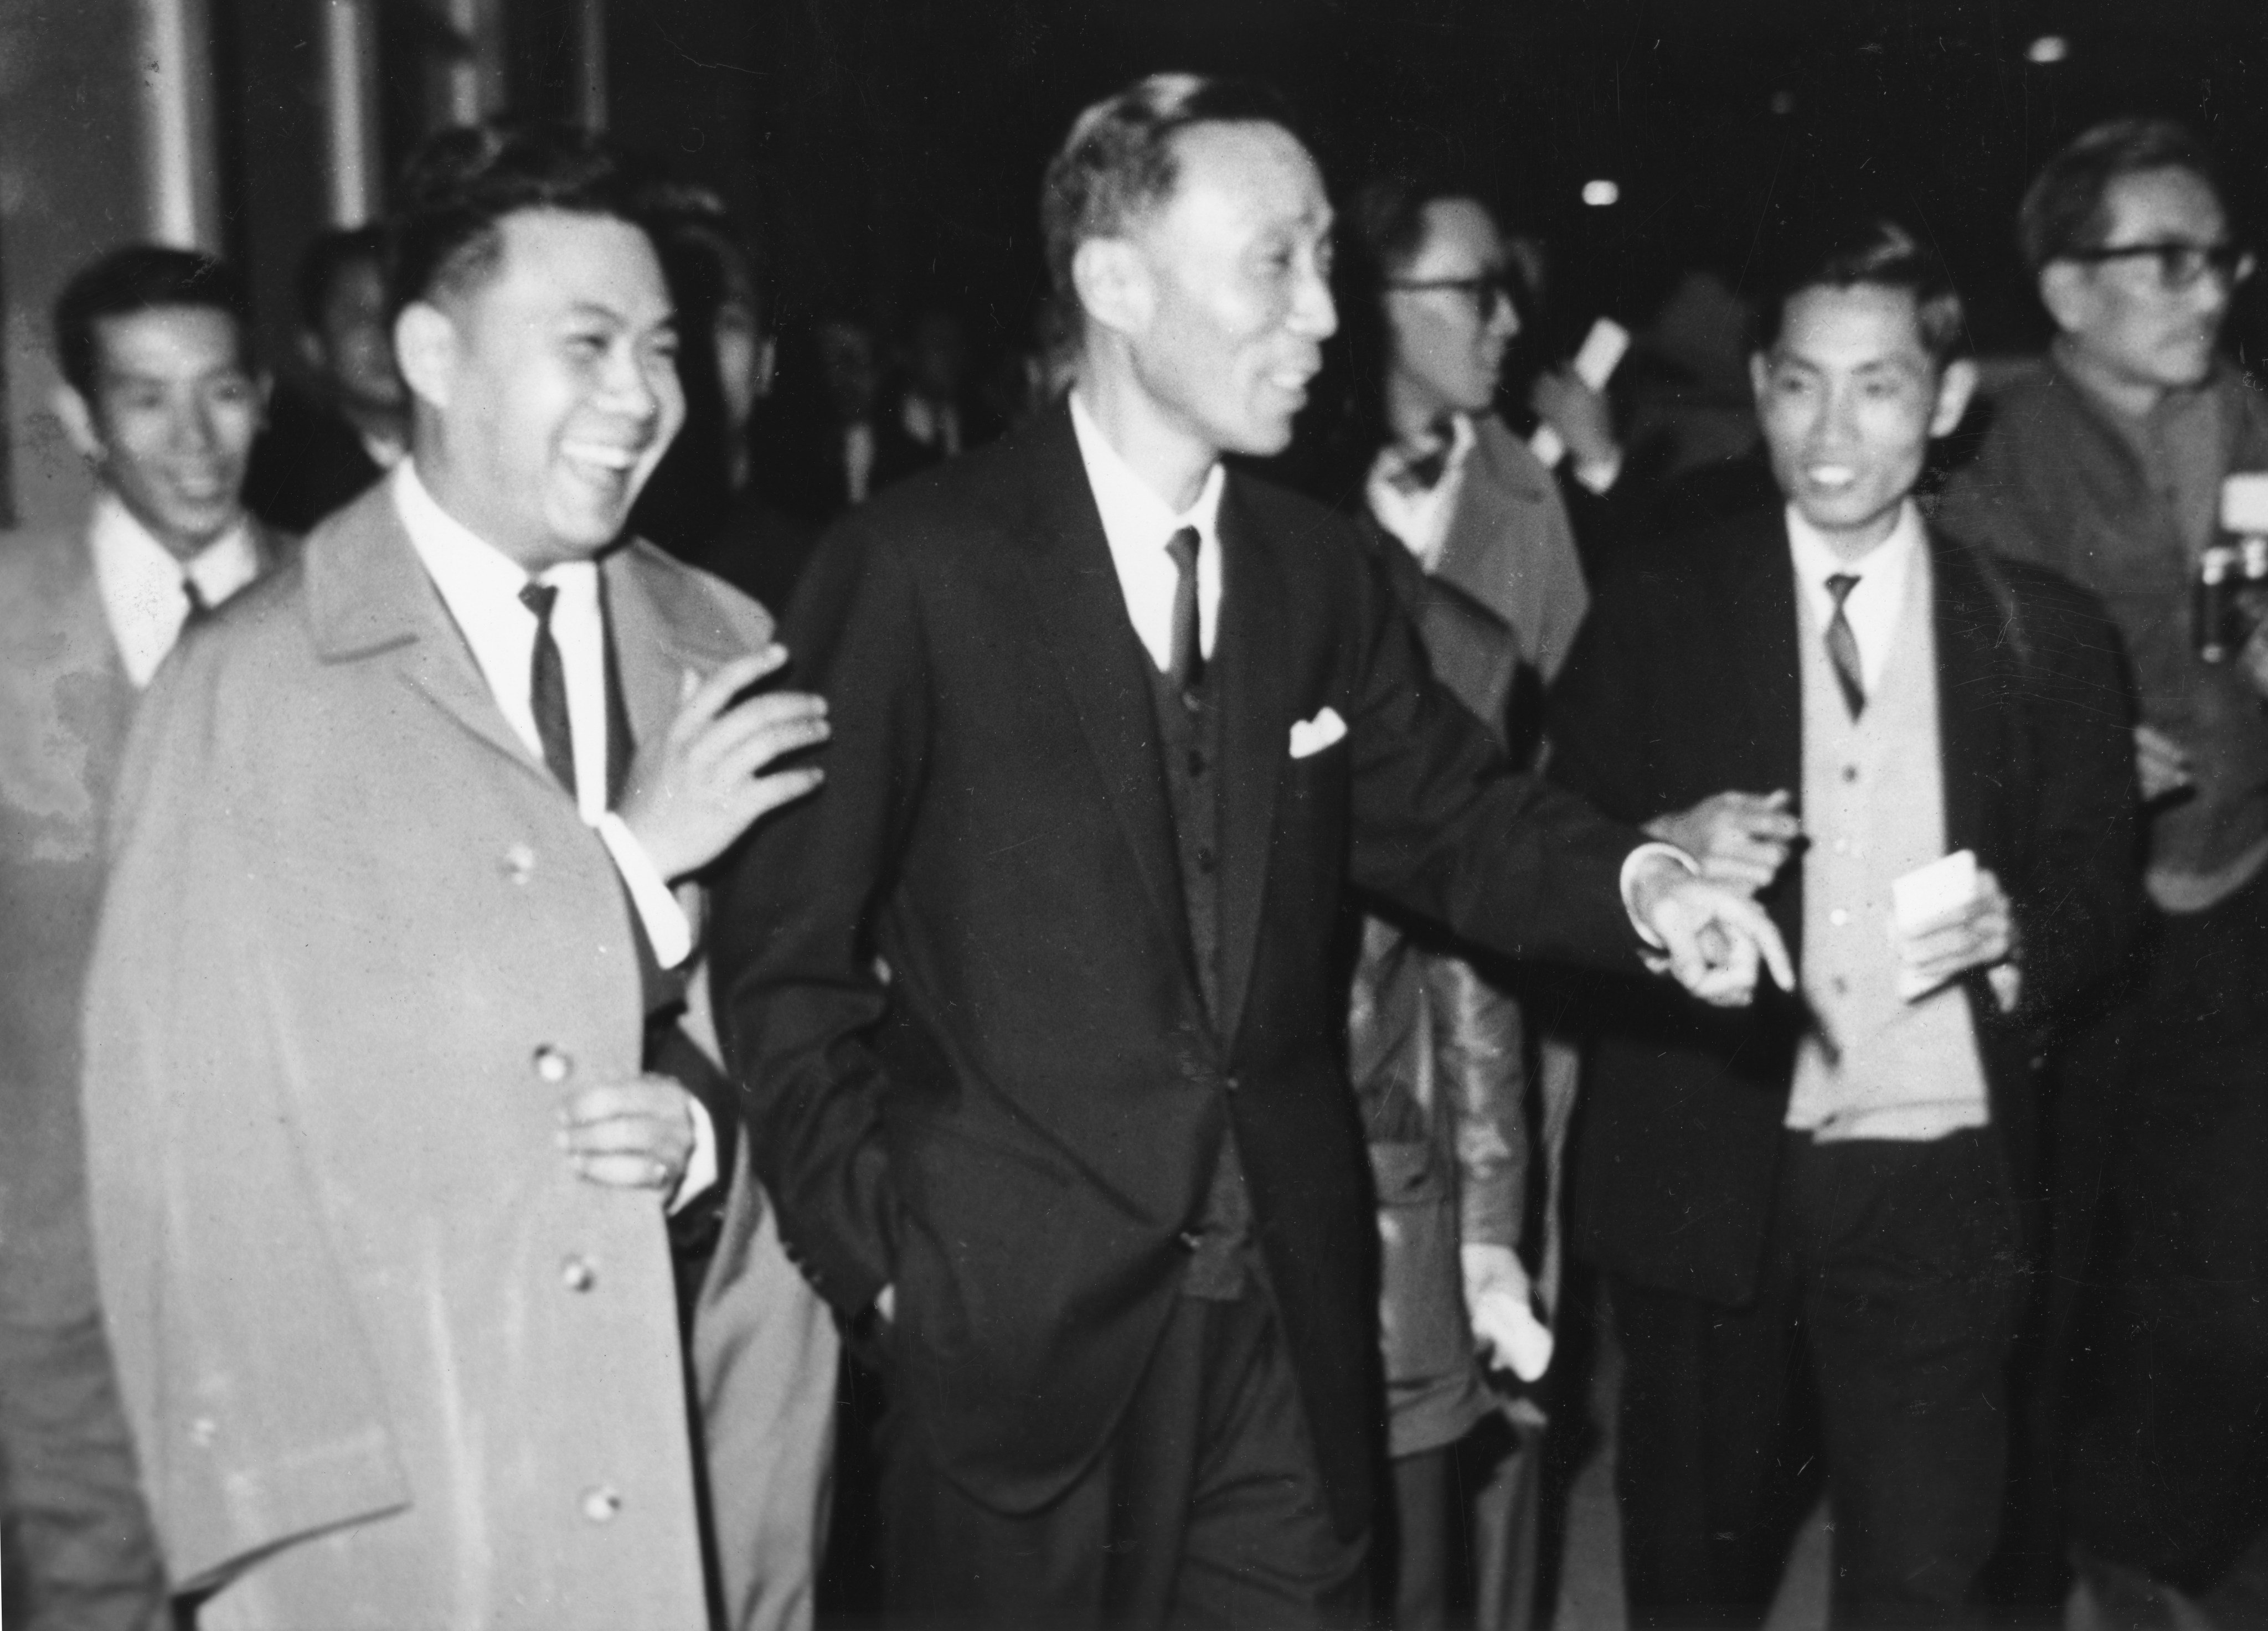 Vee Ming Shaw (left), with his father Run Run Shaw, being interviewed by reporters at Kai Tak Airport in Hong Kong. On February 6, 1964, Vee Meng Shaw was kidnapped in Singapore and held for nearly 12 days. Photo: Wah Kiu Yat Pao